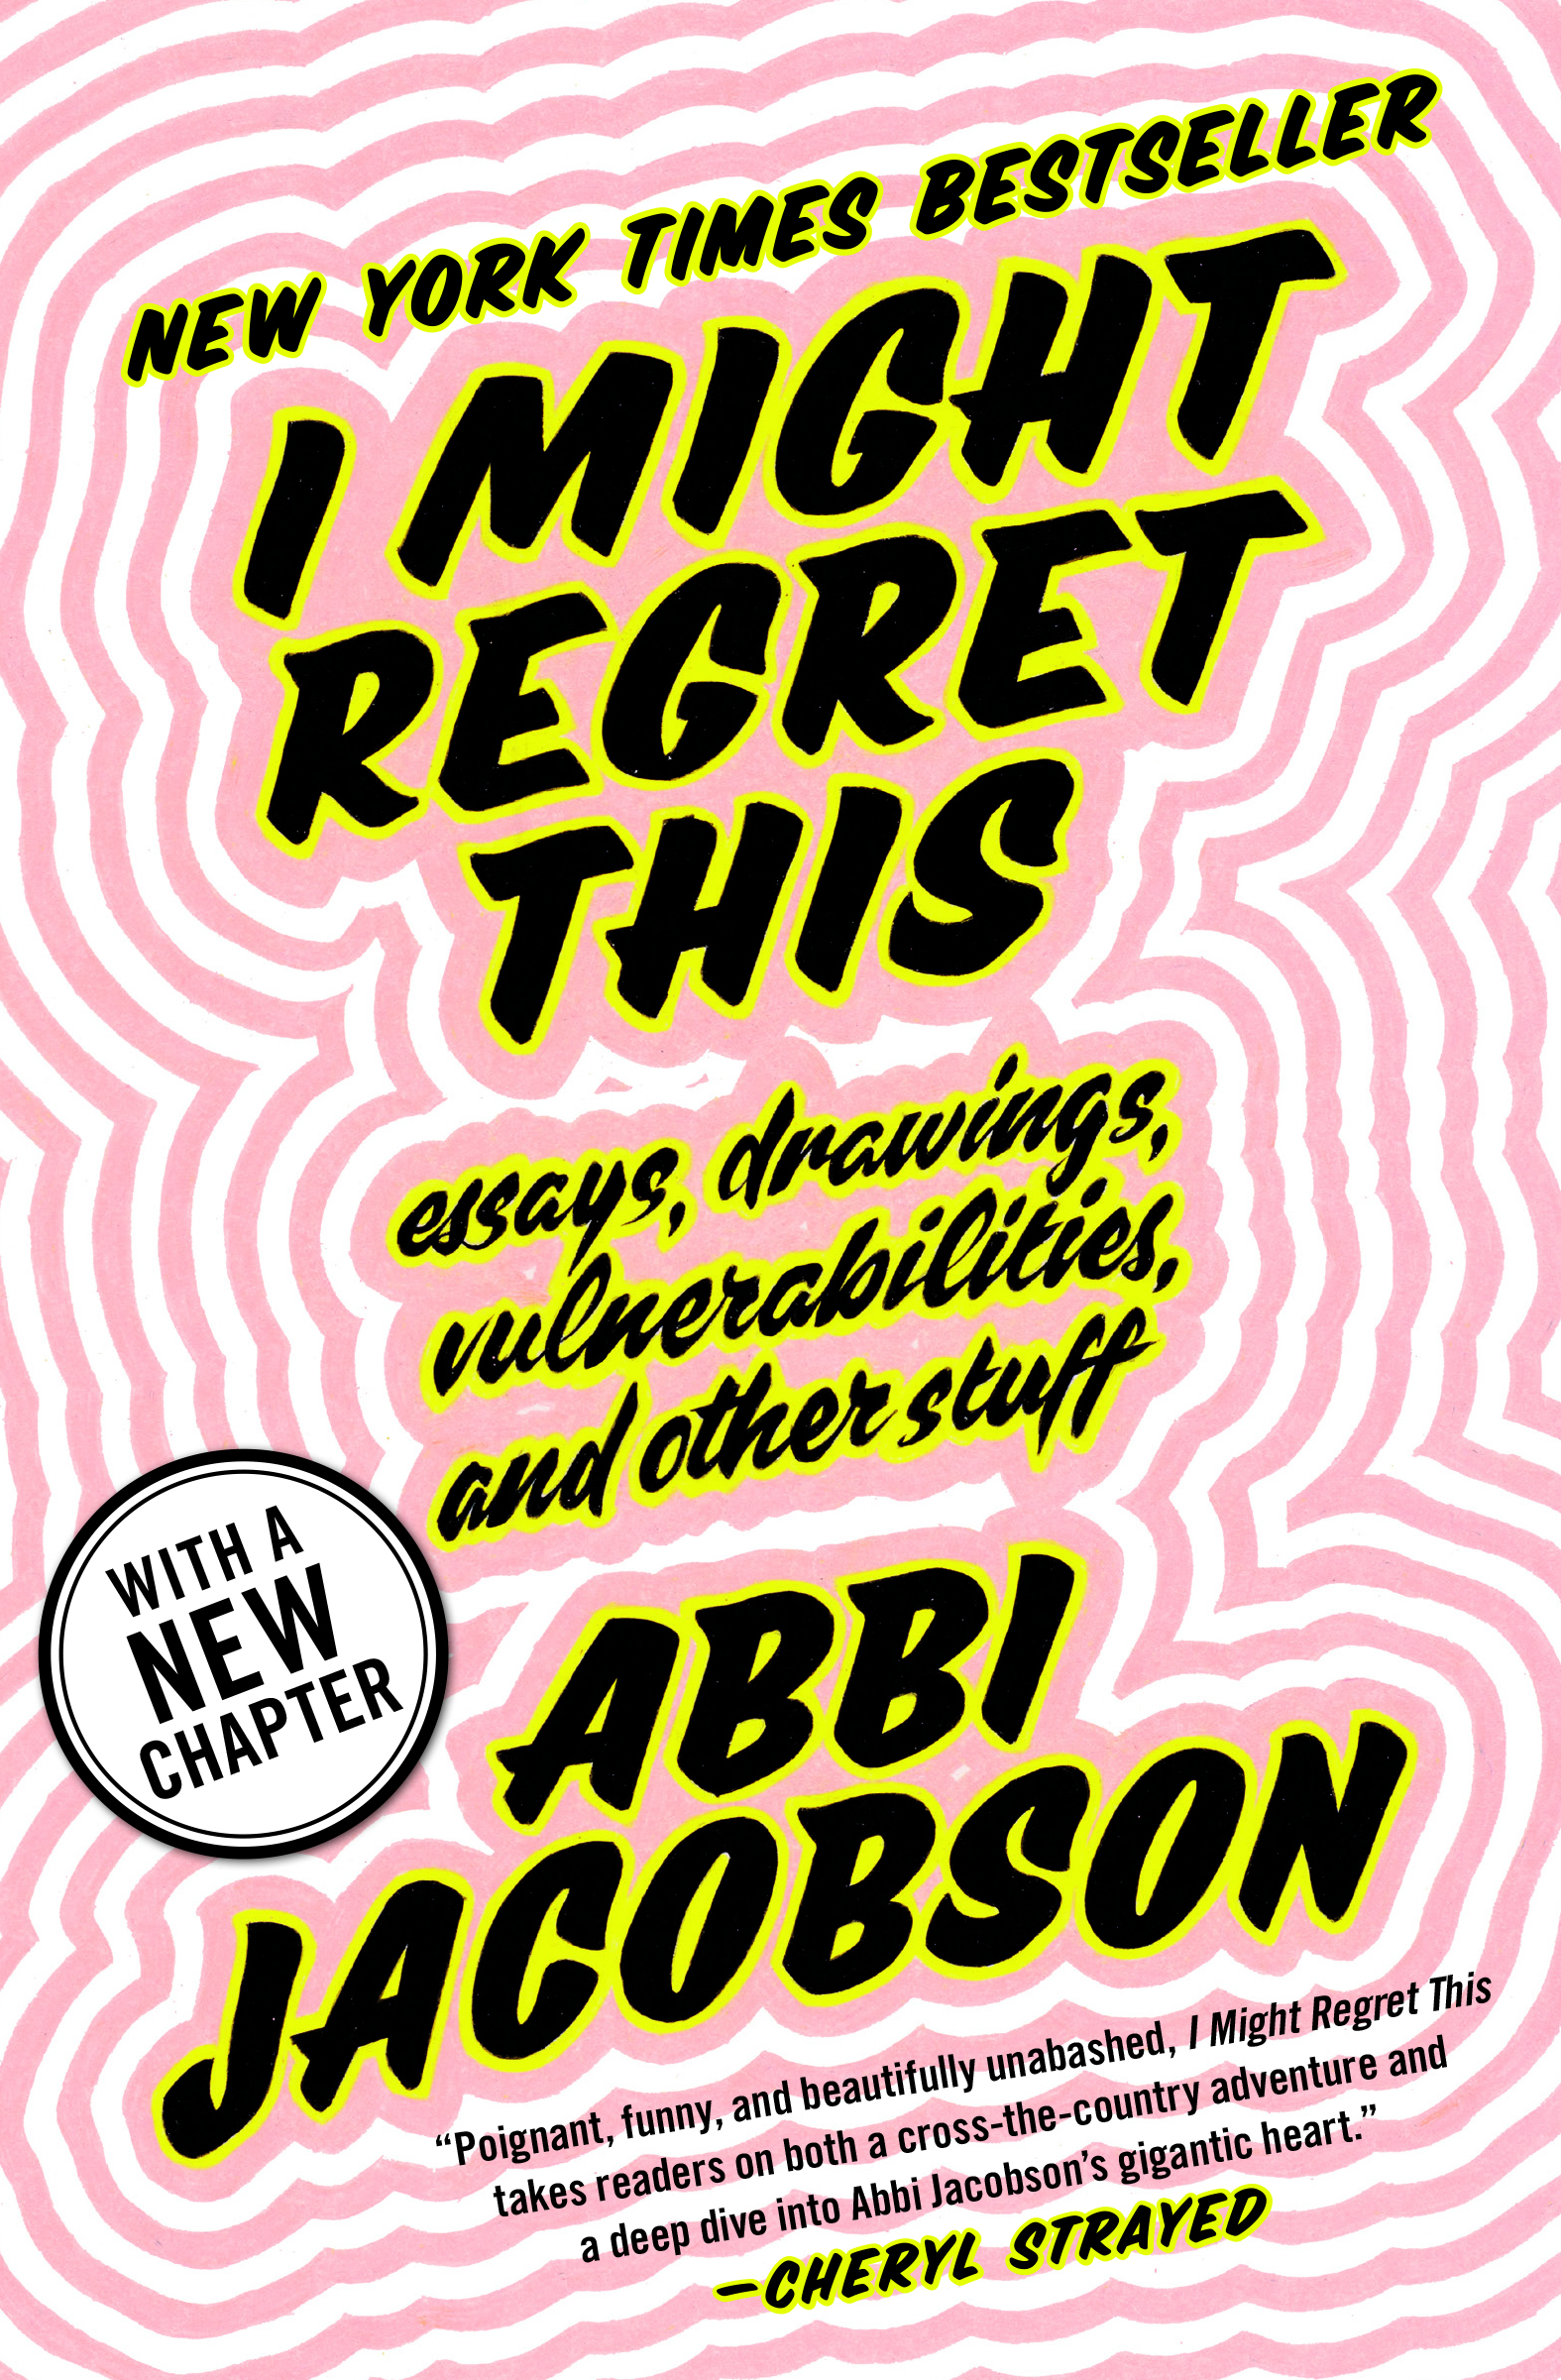 Paperback Launch: I Might Regret This by Abbi Jacobson in conversation with Ariel Levy